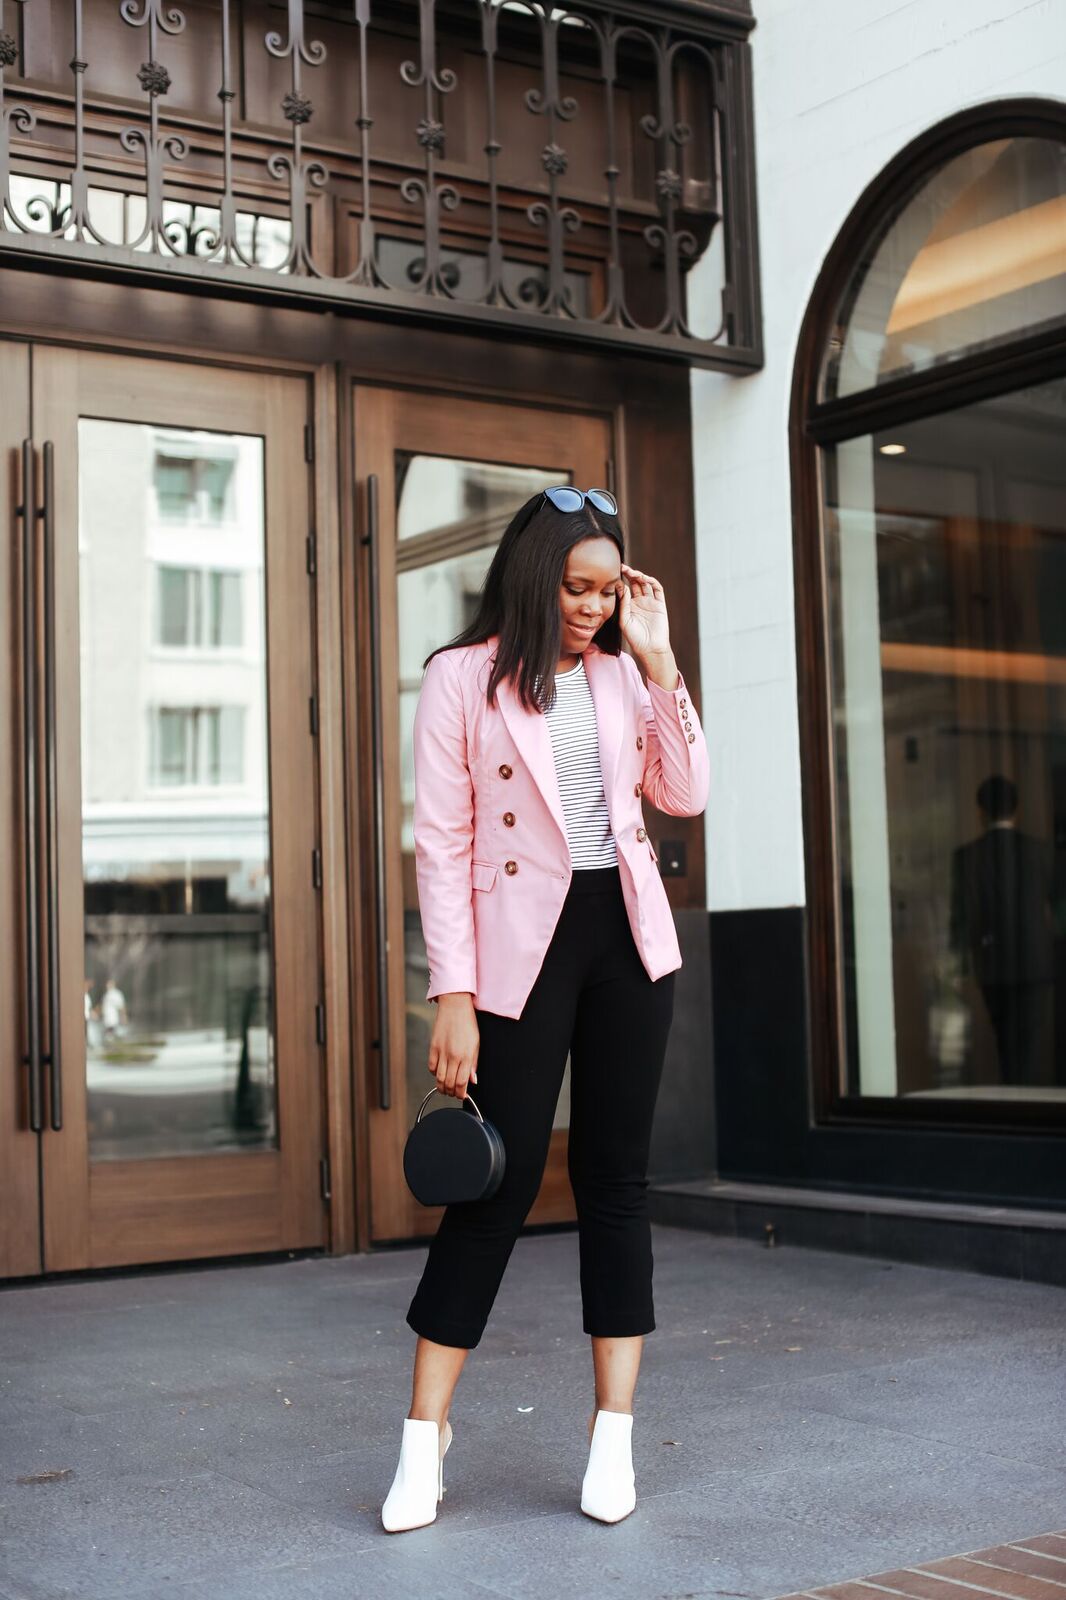 Look of the Week - Pink Suit  Work outfits women, Cute work outfits,  Fashionable work outfit